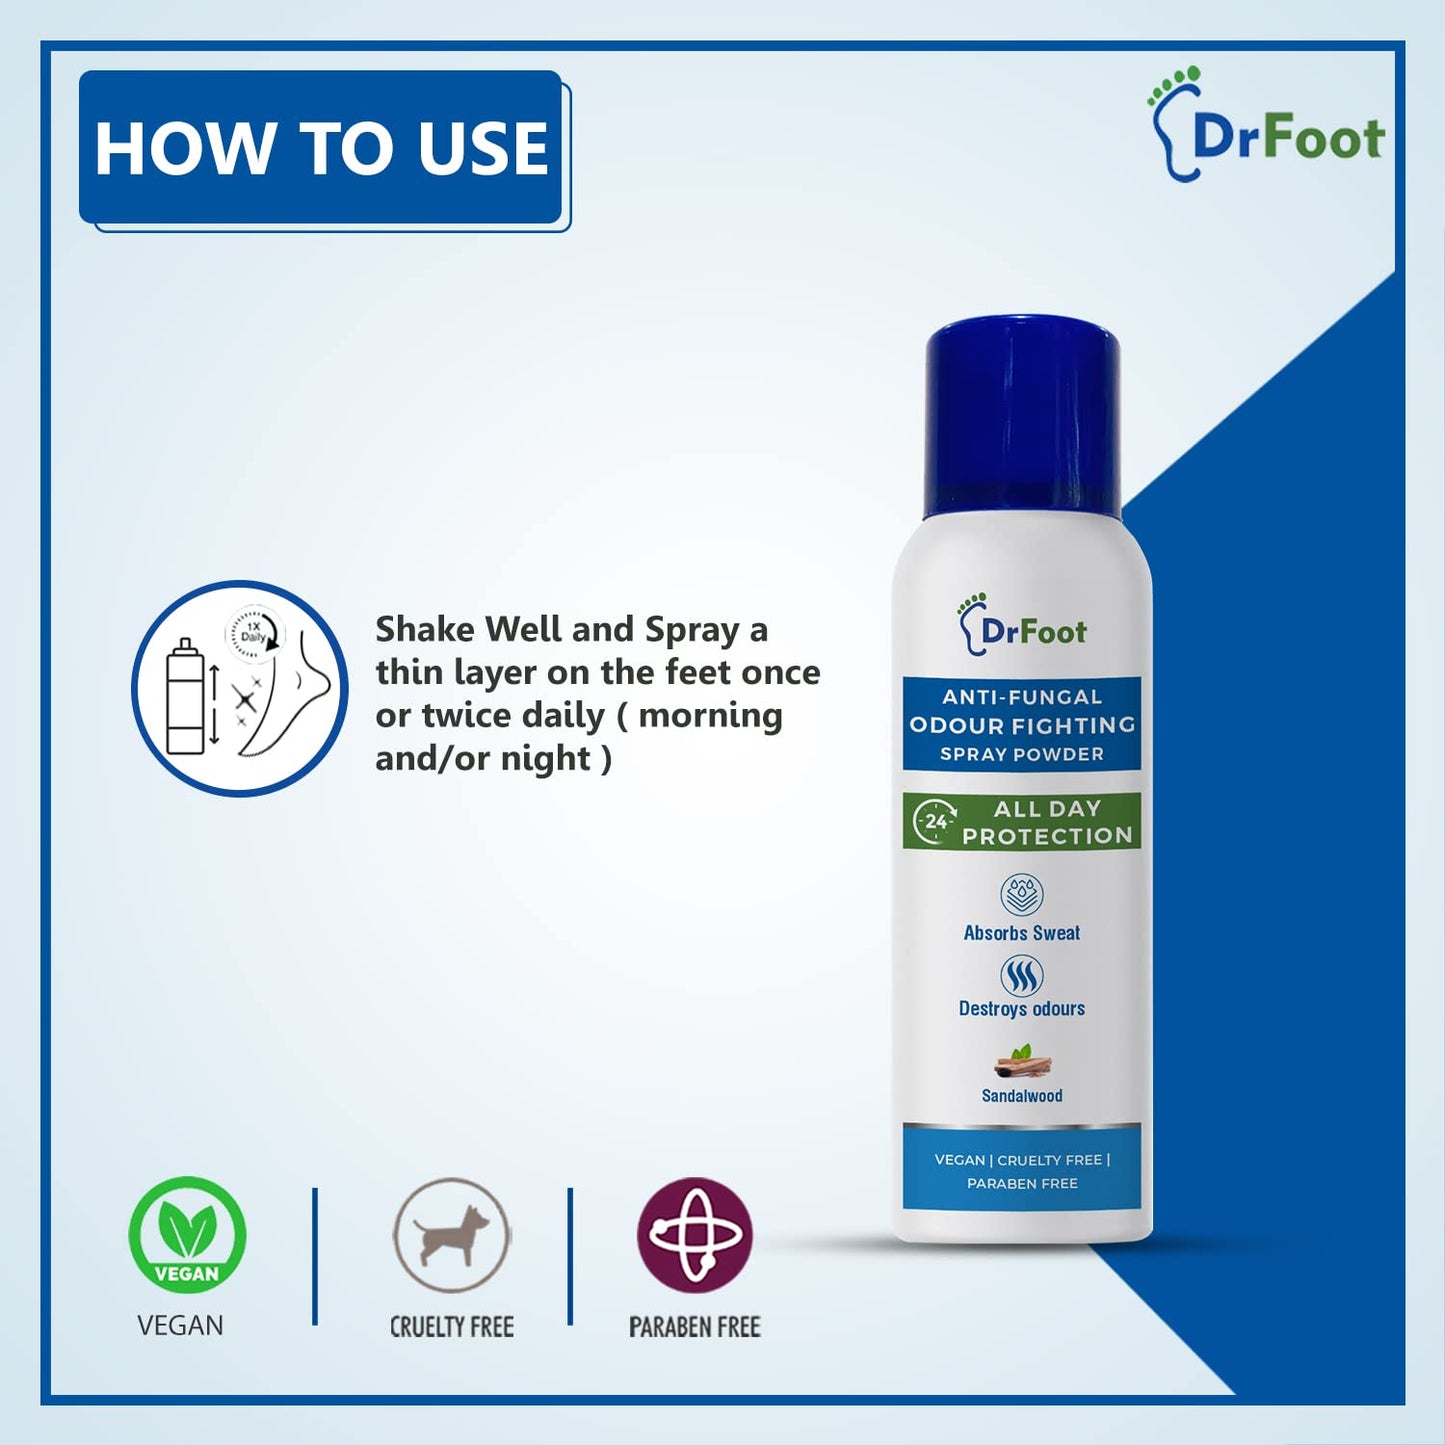 Dr Foot Anti-Fungal Odour Fighting Spray Powder with Neem Powder Menthol Oil  Sandalwood  Ultimate Odour Neutralizer Removes Bad Smell  Keep your foot Fresh and Dry  130ml  80gm Pack of 3